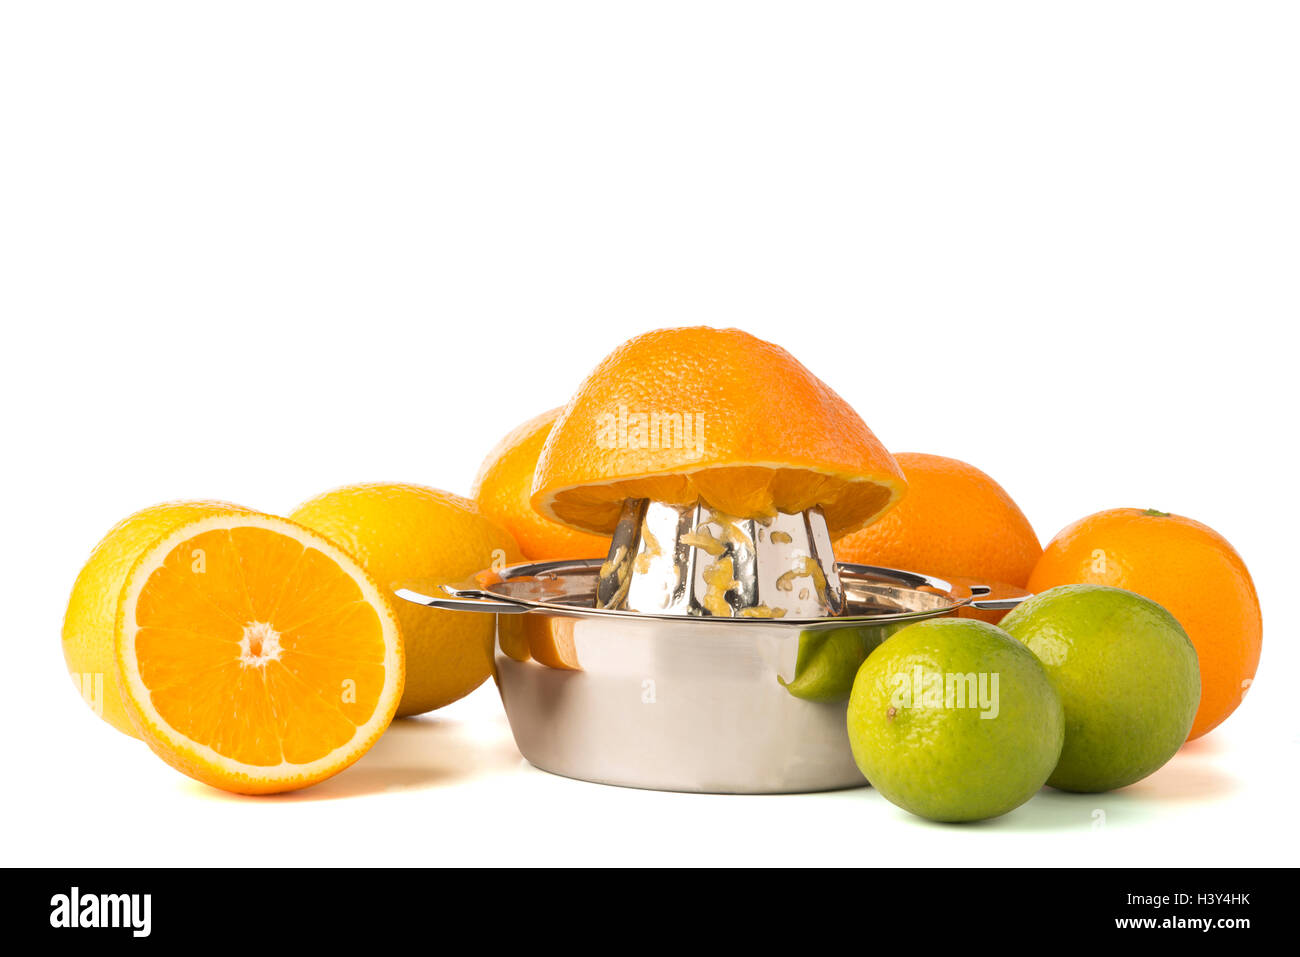 Half an orange on stainless steel orange or citrus hand juicer surrounded by whole lemons, oranges, and lime Stock Photo